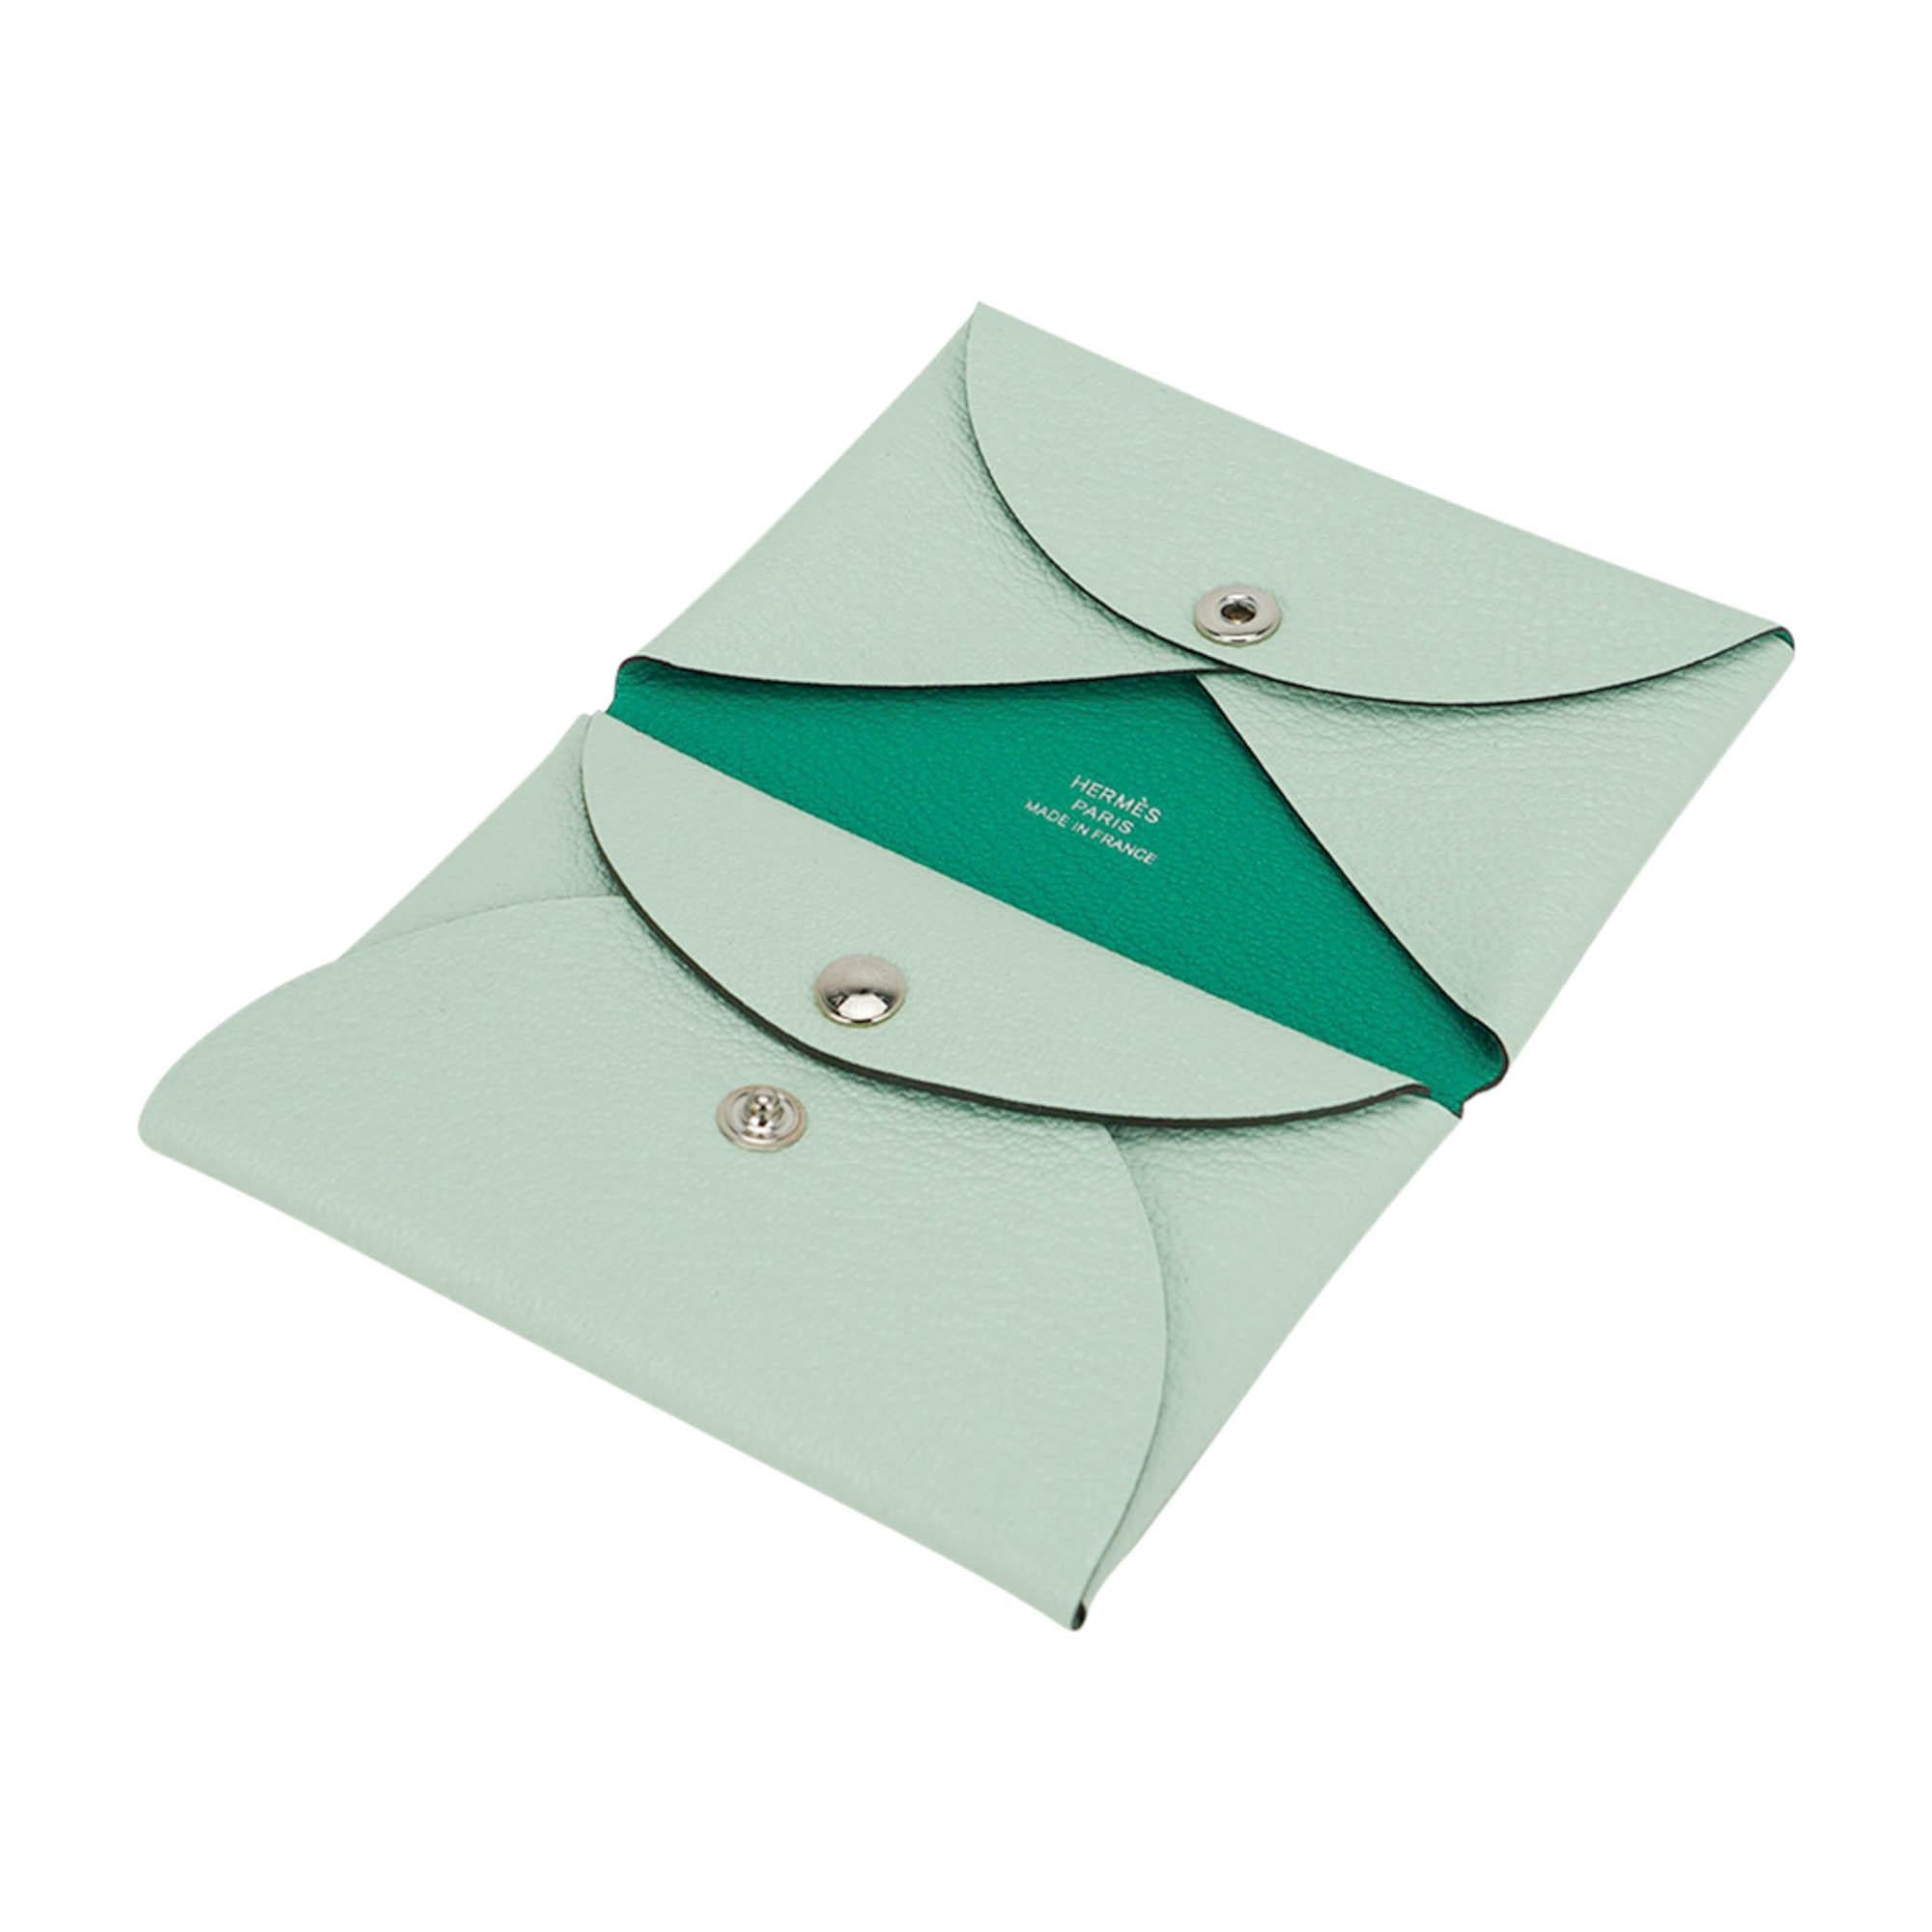 Mightychic offers a rare limited edition Hermes Calvi Duo Verso card holder featured in Vert Fizz and Menthe Chevre leather.
The new design is clever play on folds of leather that is so functional.
One slot for business / credit cards and a snap